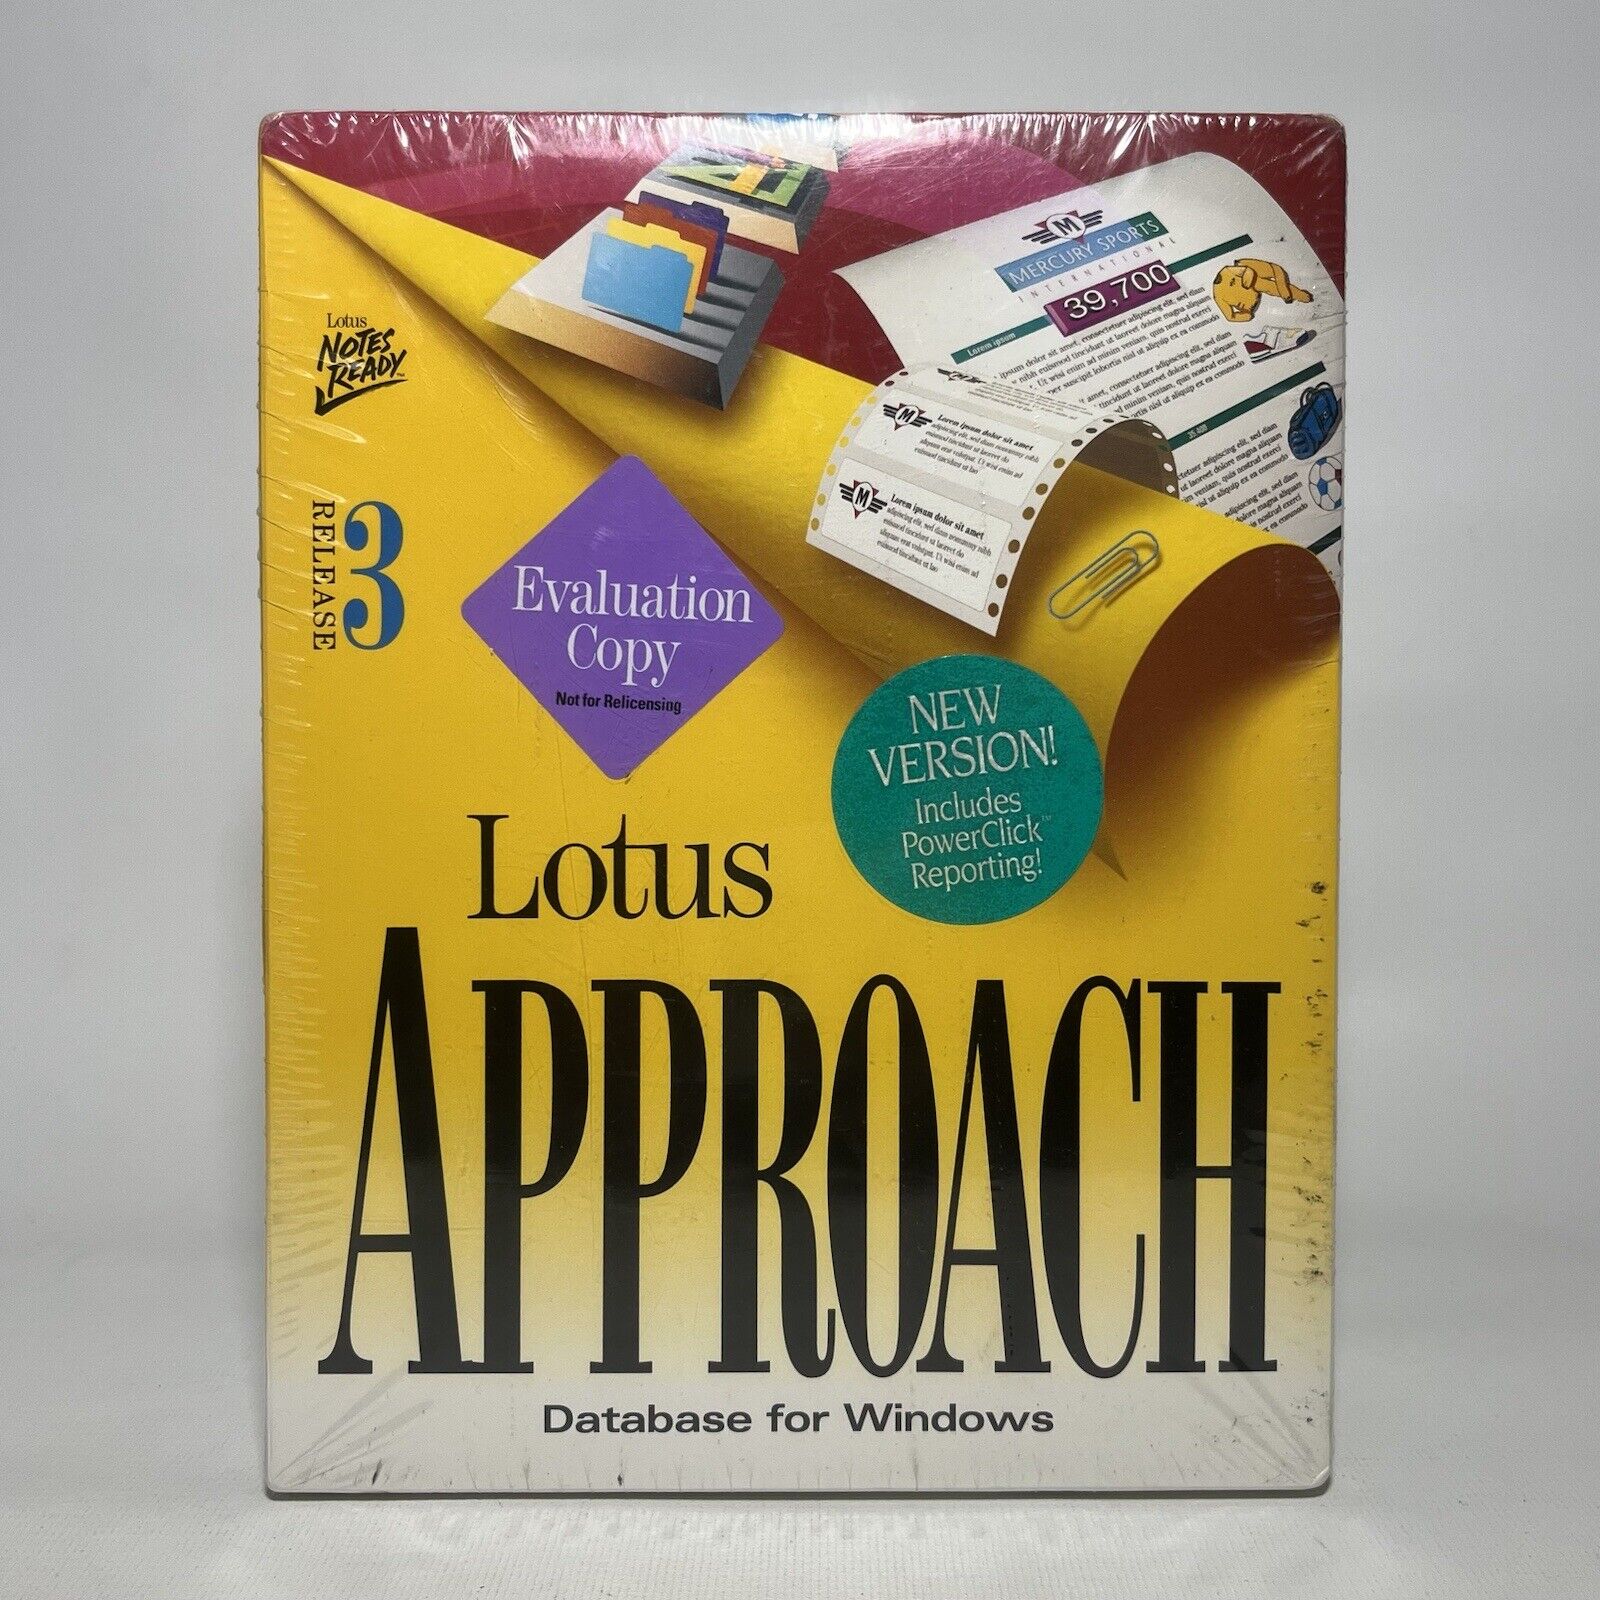 Lotus Approach 3.0 For Windows DOS Vintage Software Disk 3.5” New Sealed